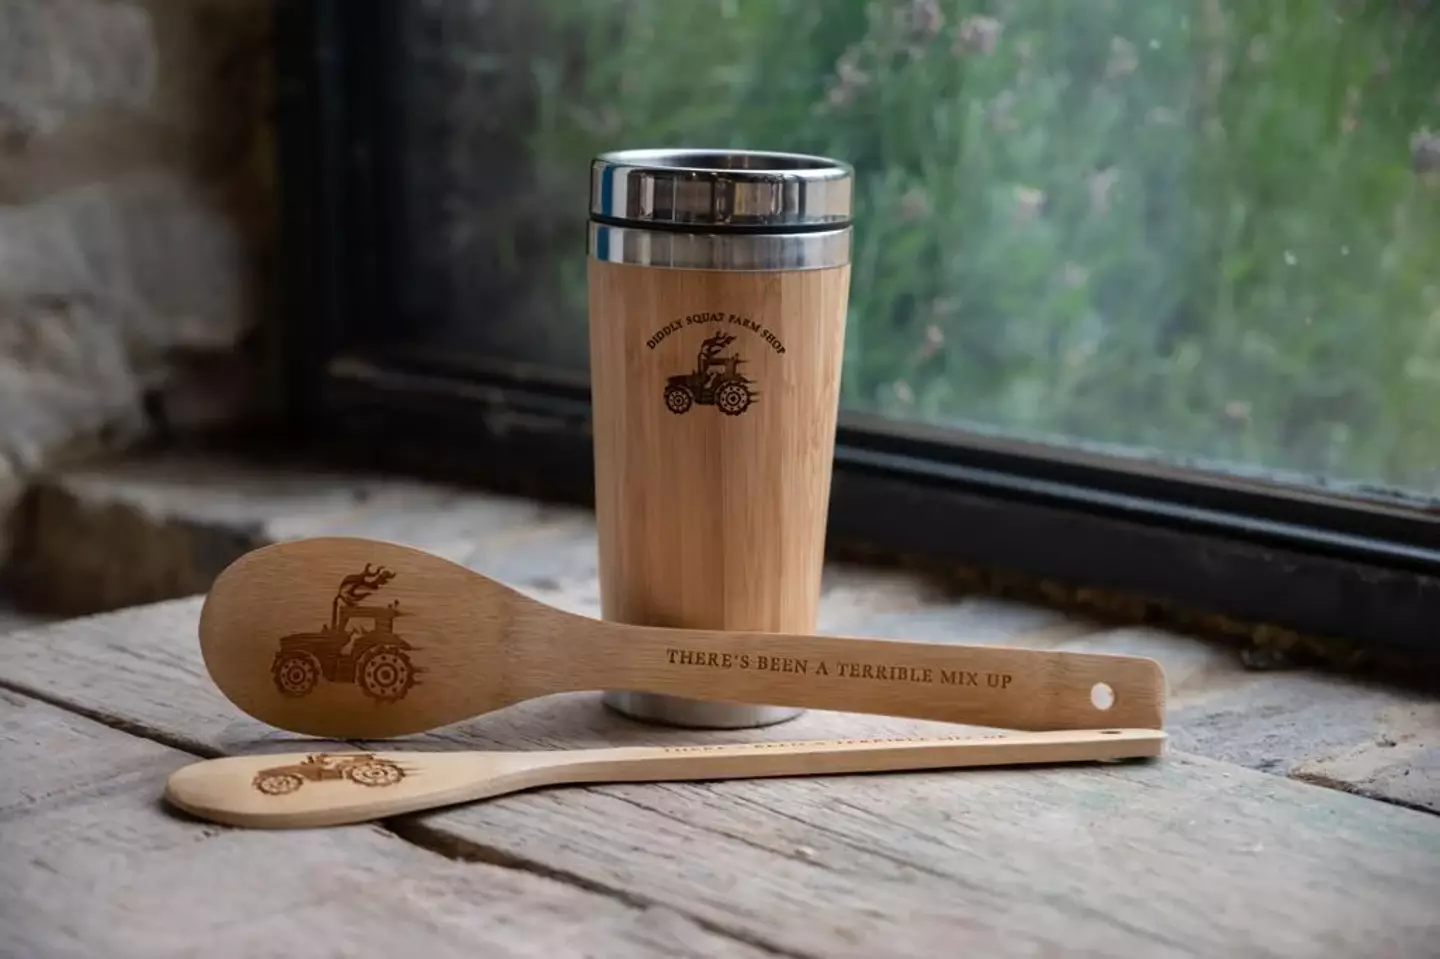 The travel mug and wooden spoon set. Quite nice really.